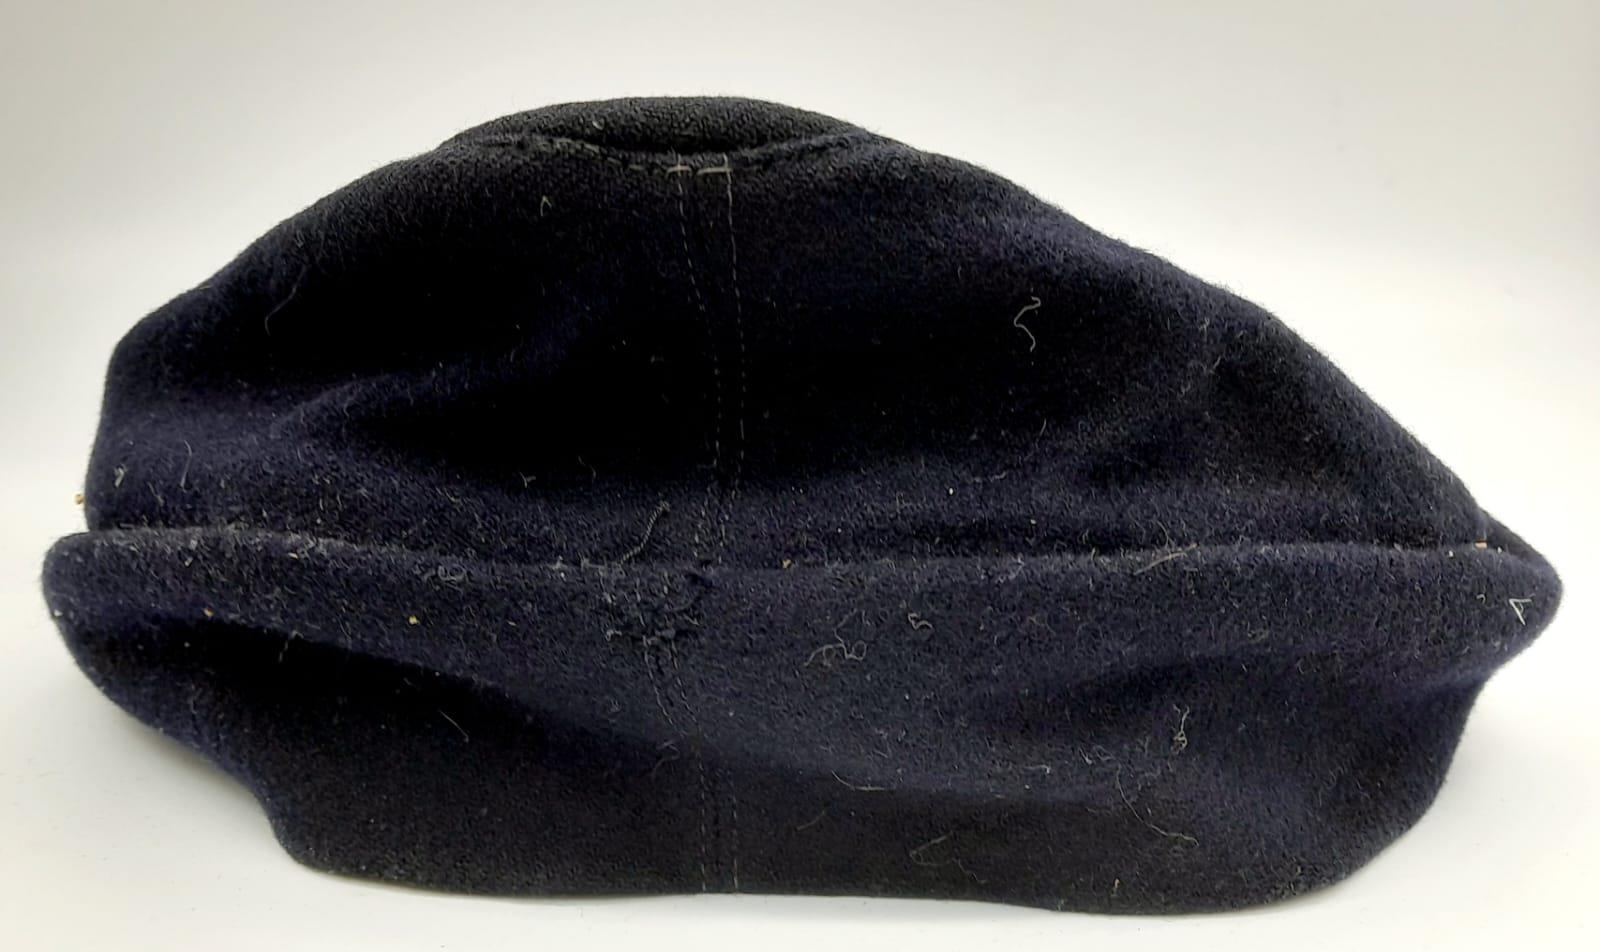 3rd Reich Hitler Youth M43 Ski Cap. - Image 6 of 6